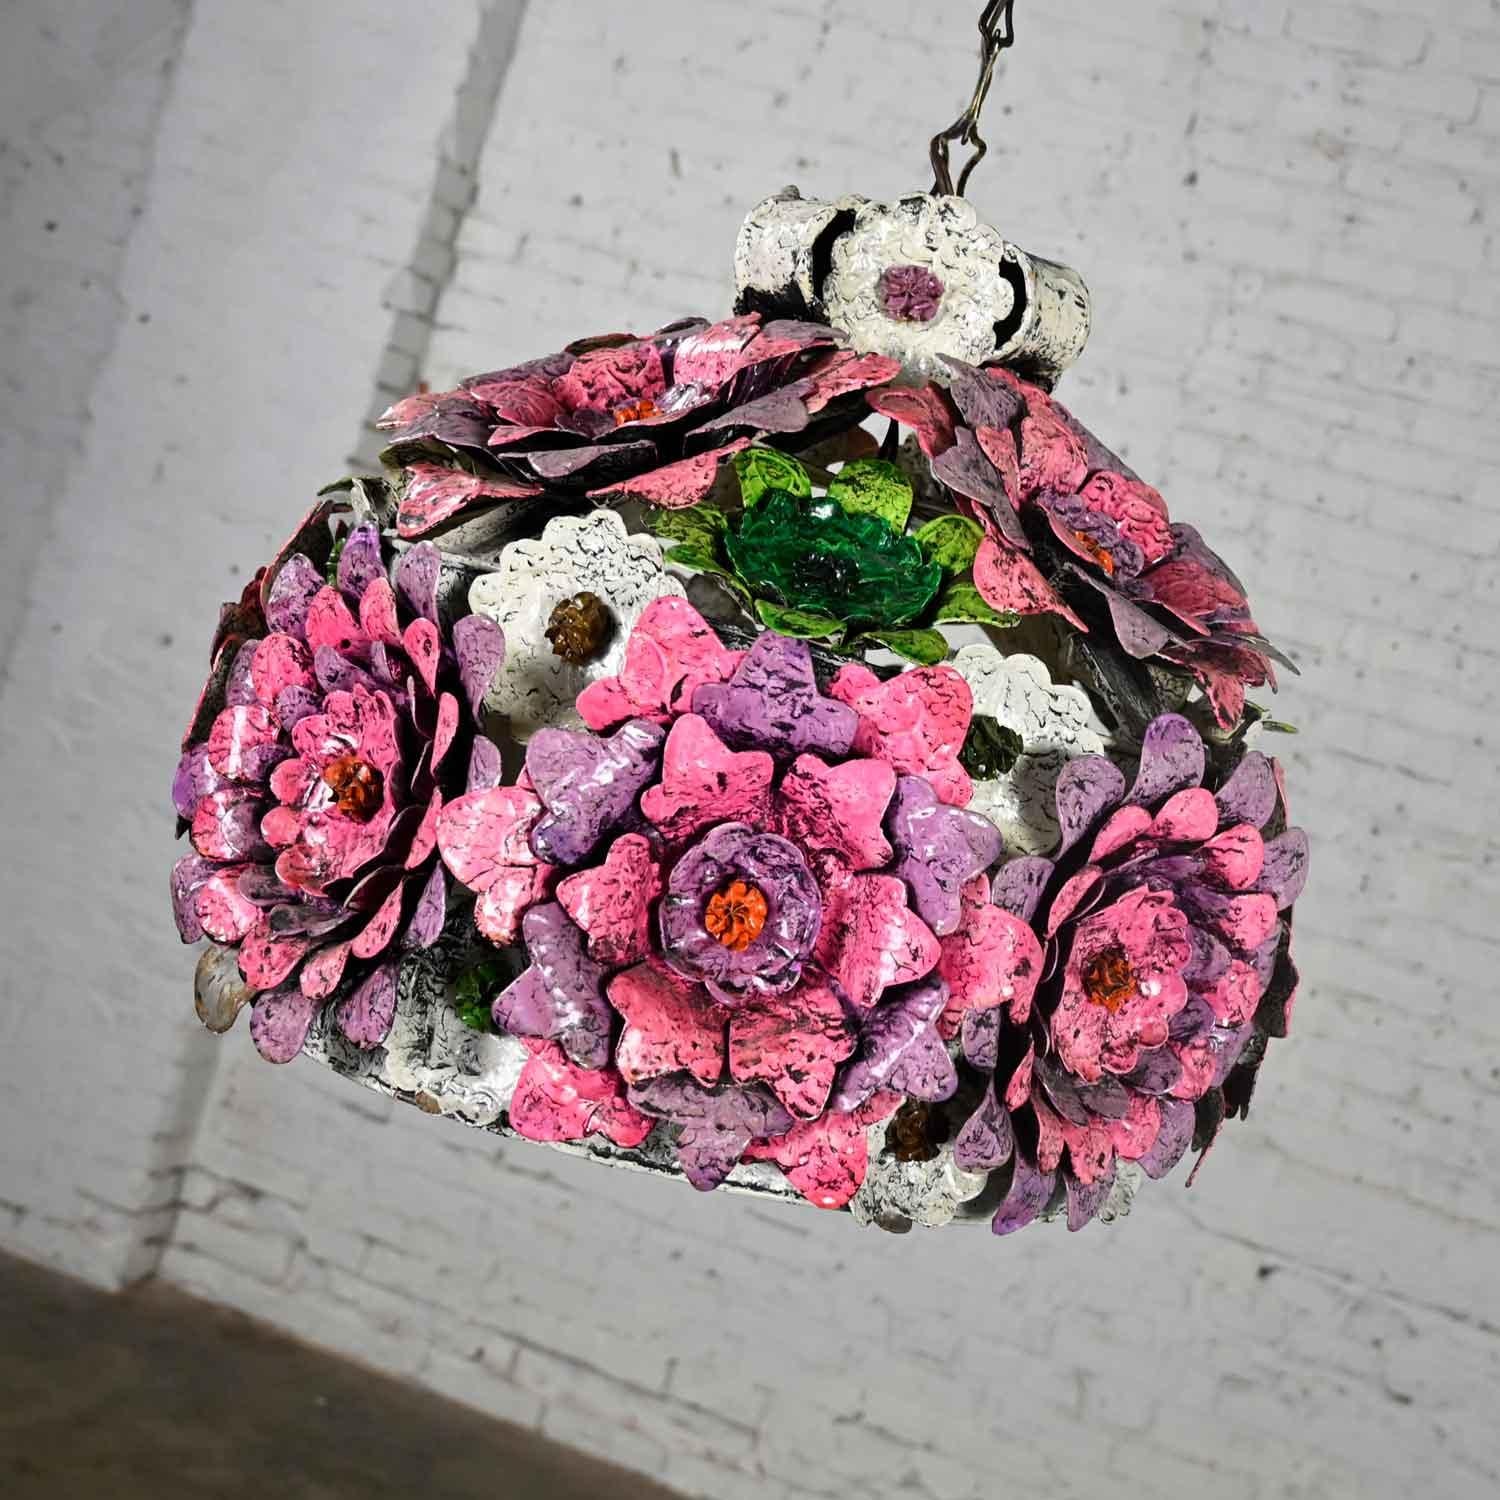 Awesome flower power mod Mid-Century Modern dome hanging light or swag lamp comprised of a painted metal dome, decorative bulb, and chain with bow tie links. It has a tag saying Hecho en Mexico and Soldario or Soldaua or Soldano maybe Soldavio.